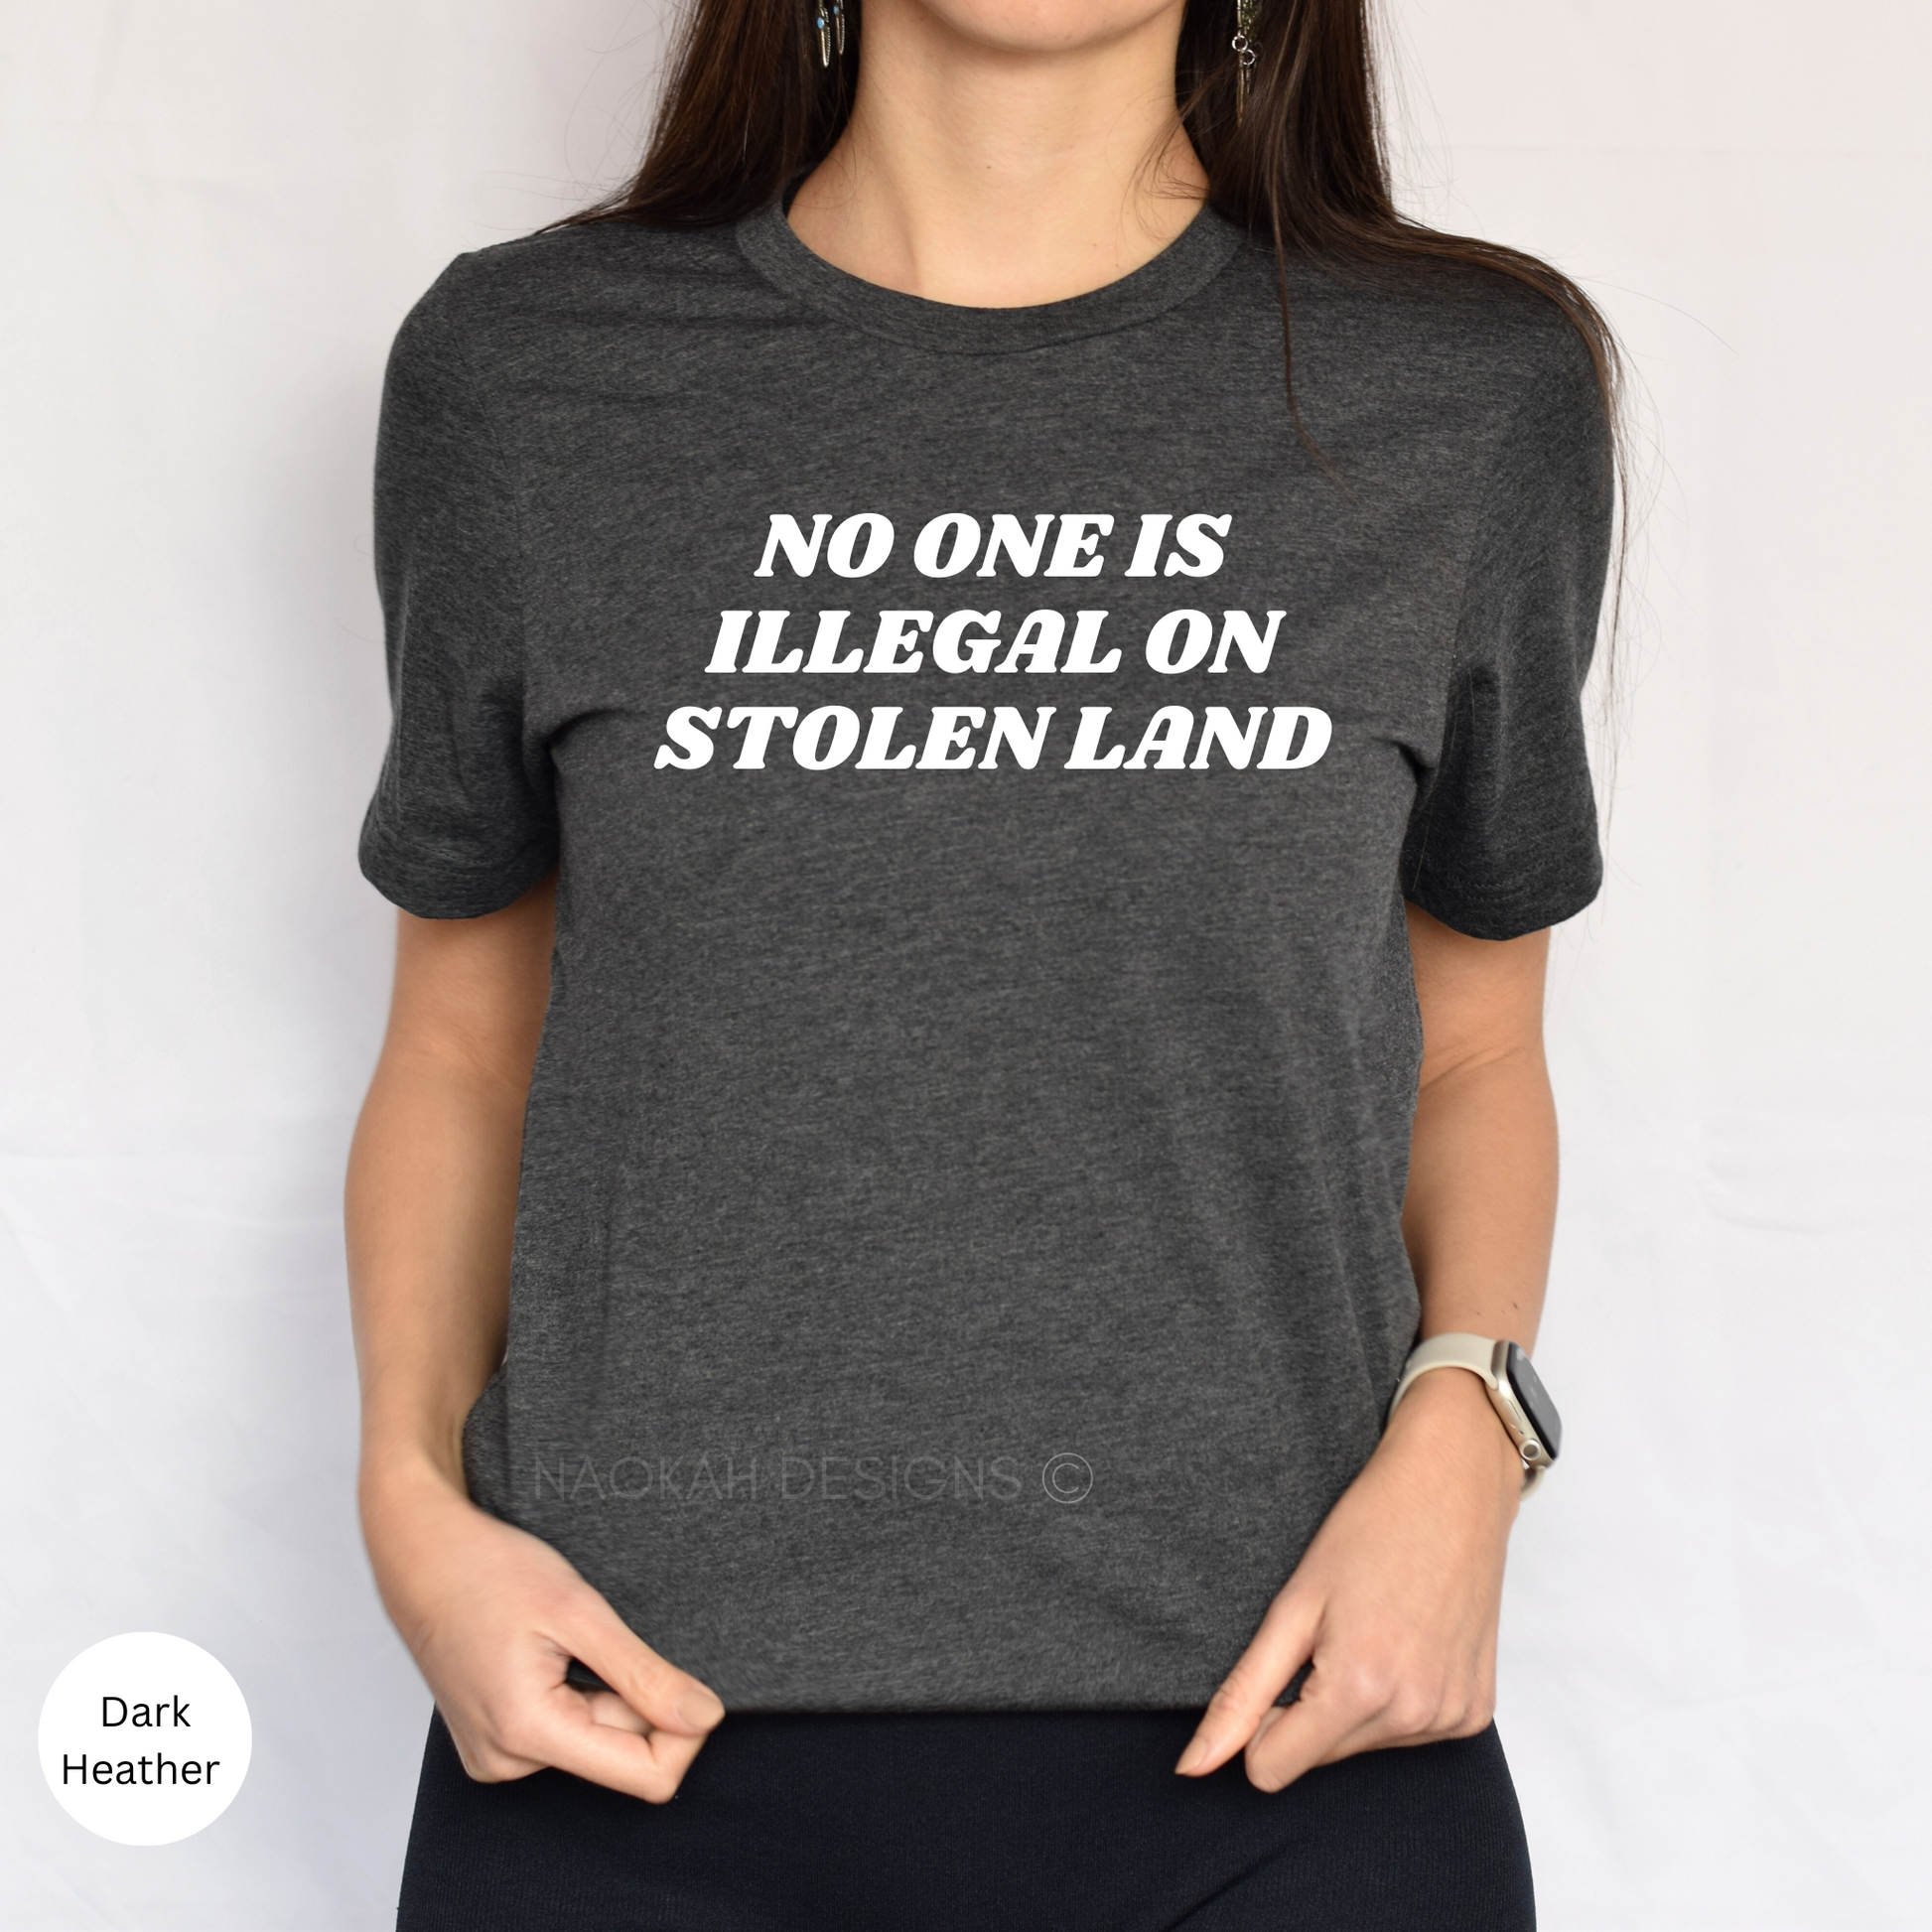 No one is illegal on stolen land shirt, Native American Shirt, Pro Immigrant Tee, No One Is Illegal Shirt, Antiracism T-shirt, Native Shirt, Immigrant SHIRT, Latino Shirt, No Human Is Illegal Shirt, Anti Trump Shirt, Immigration T-Shirt, Pro Immigrant Tee, Human Rights Top, Abolish ICE, Social Justice Activism Gift